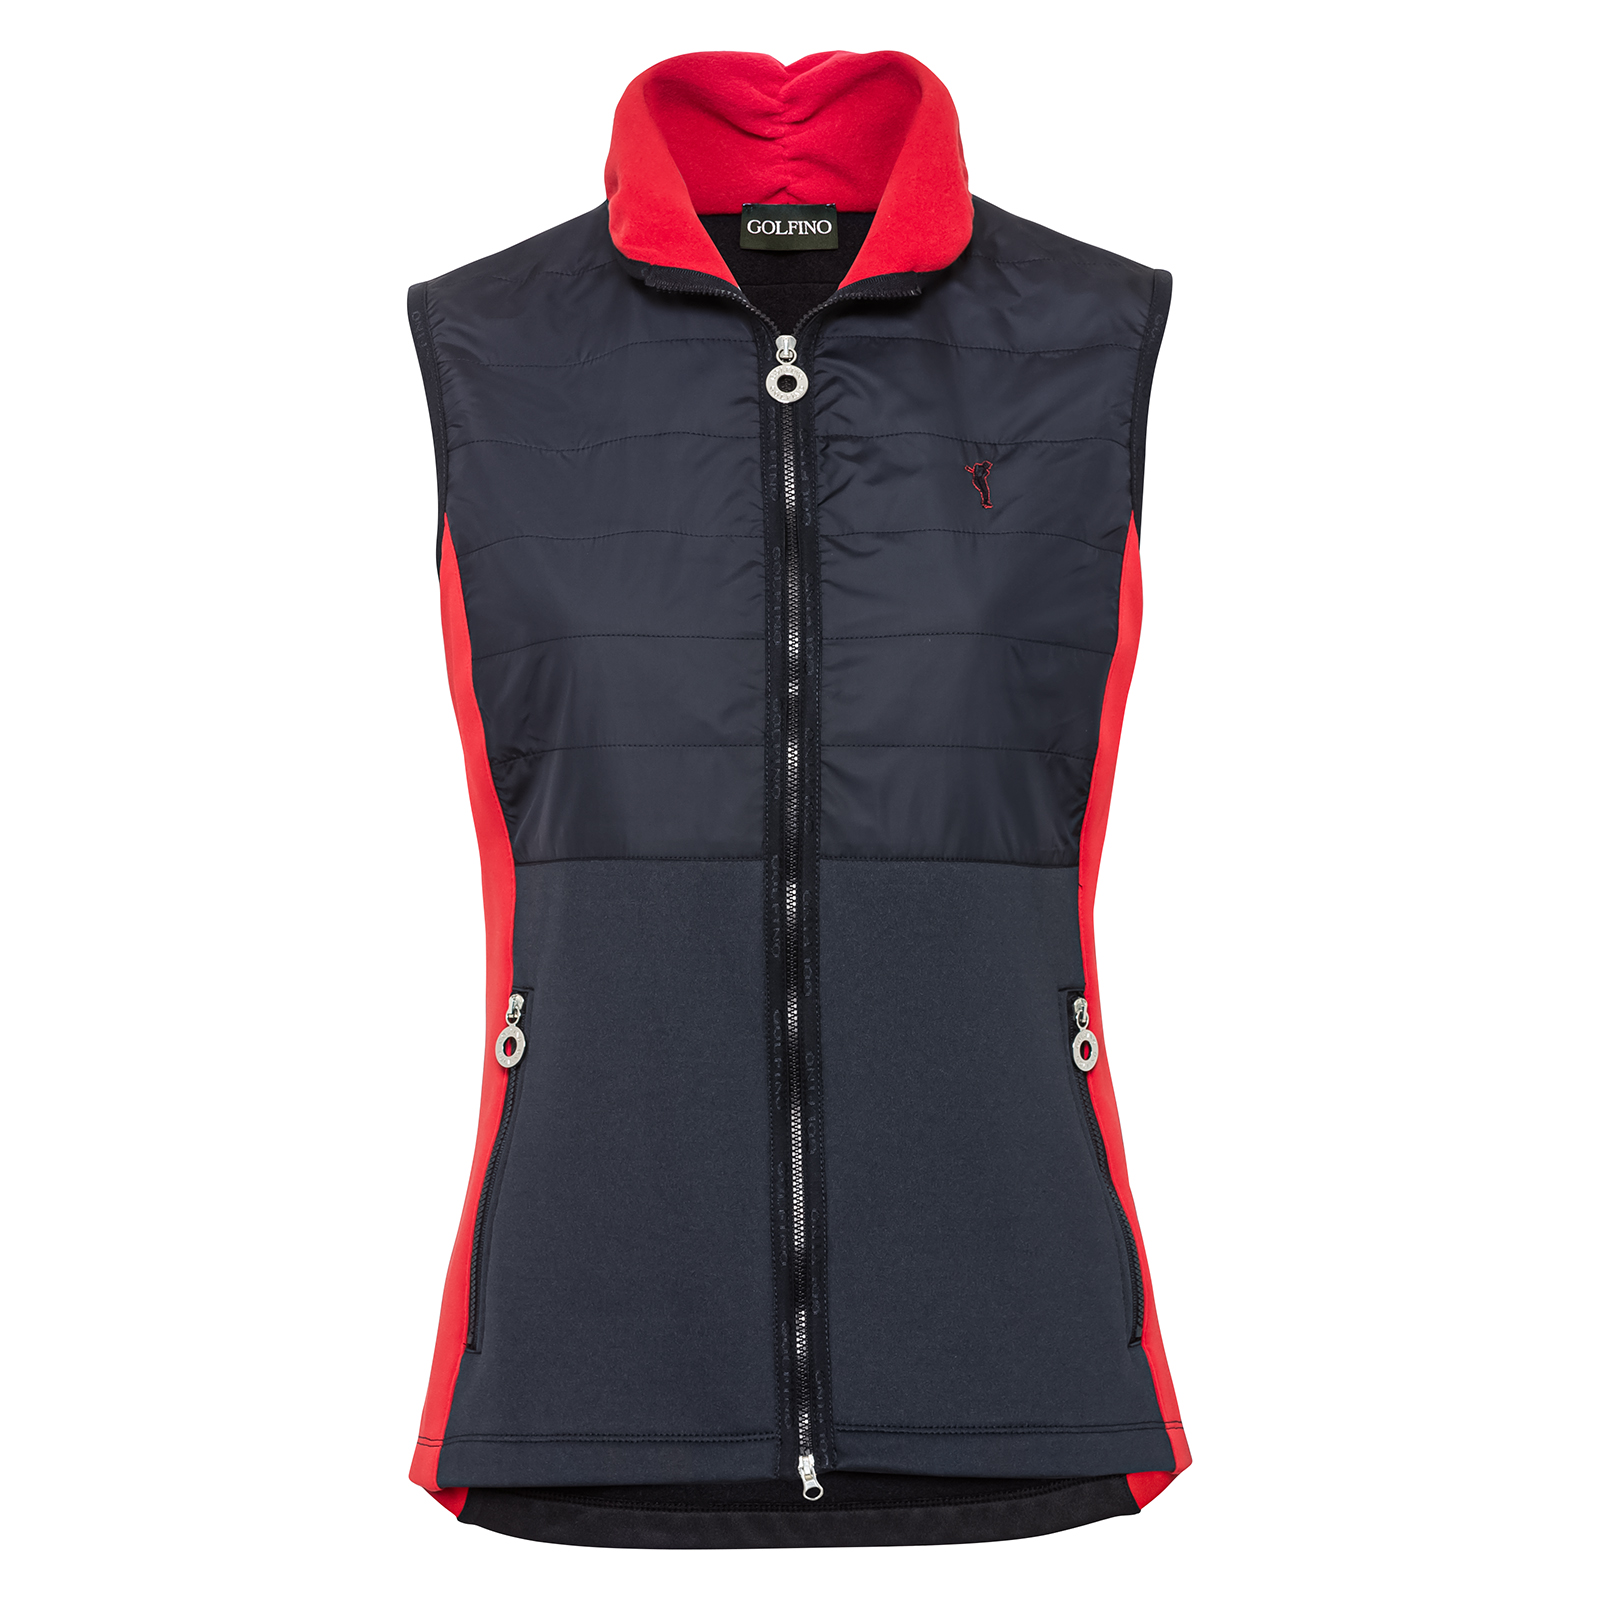 Ladies’ stretch golf waistcoat with wind protection